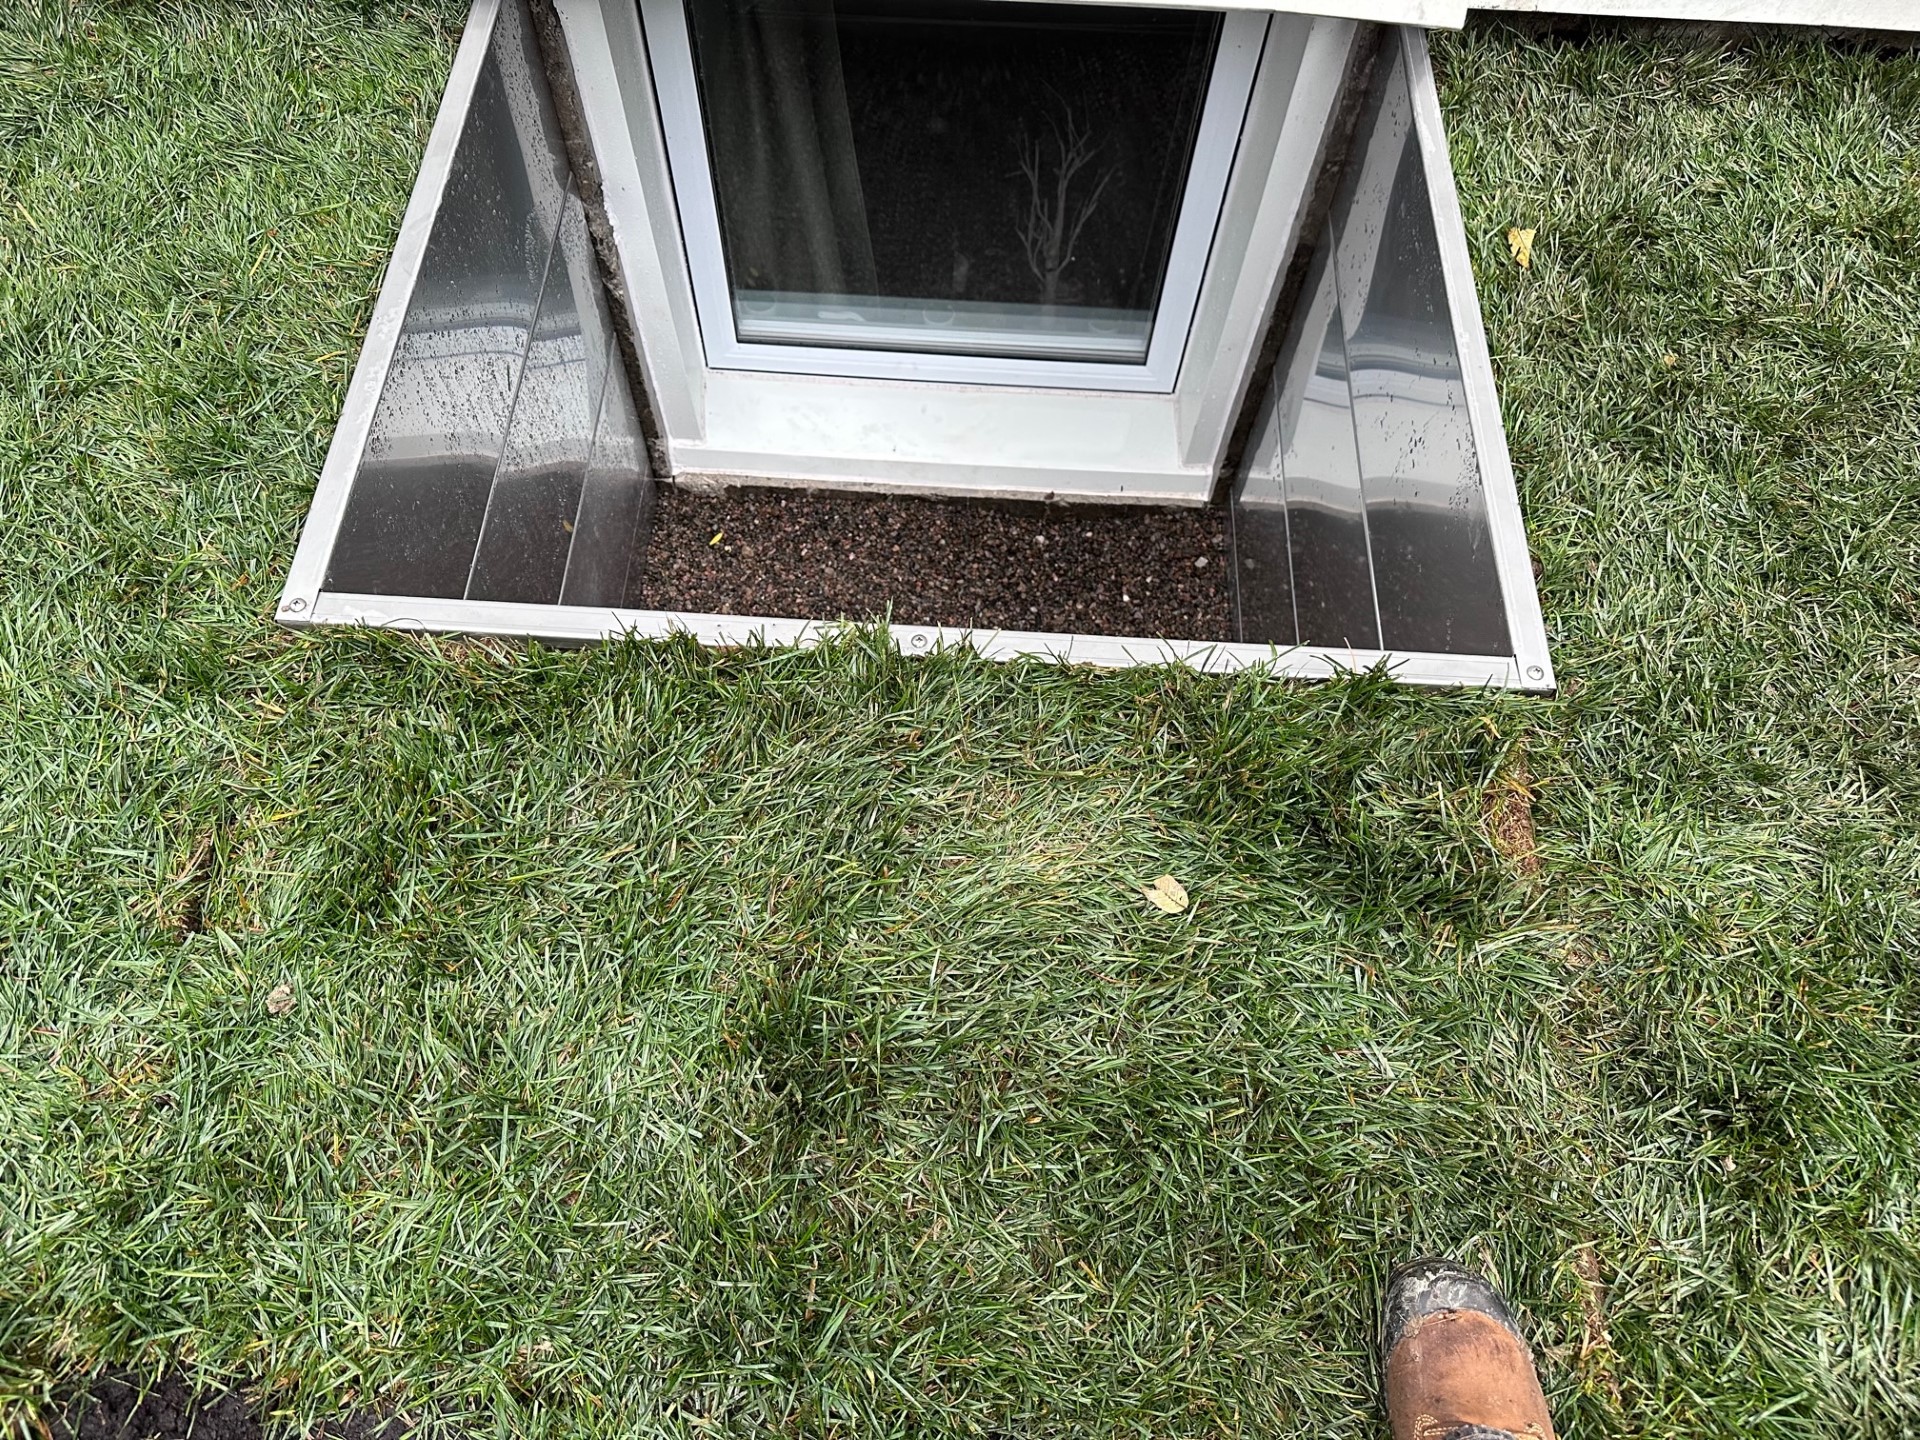 A photo of a very clean and freshly installed modern square window well